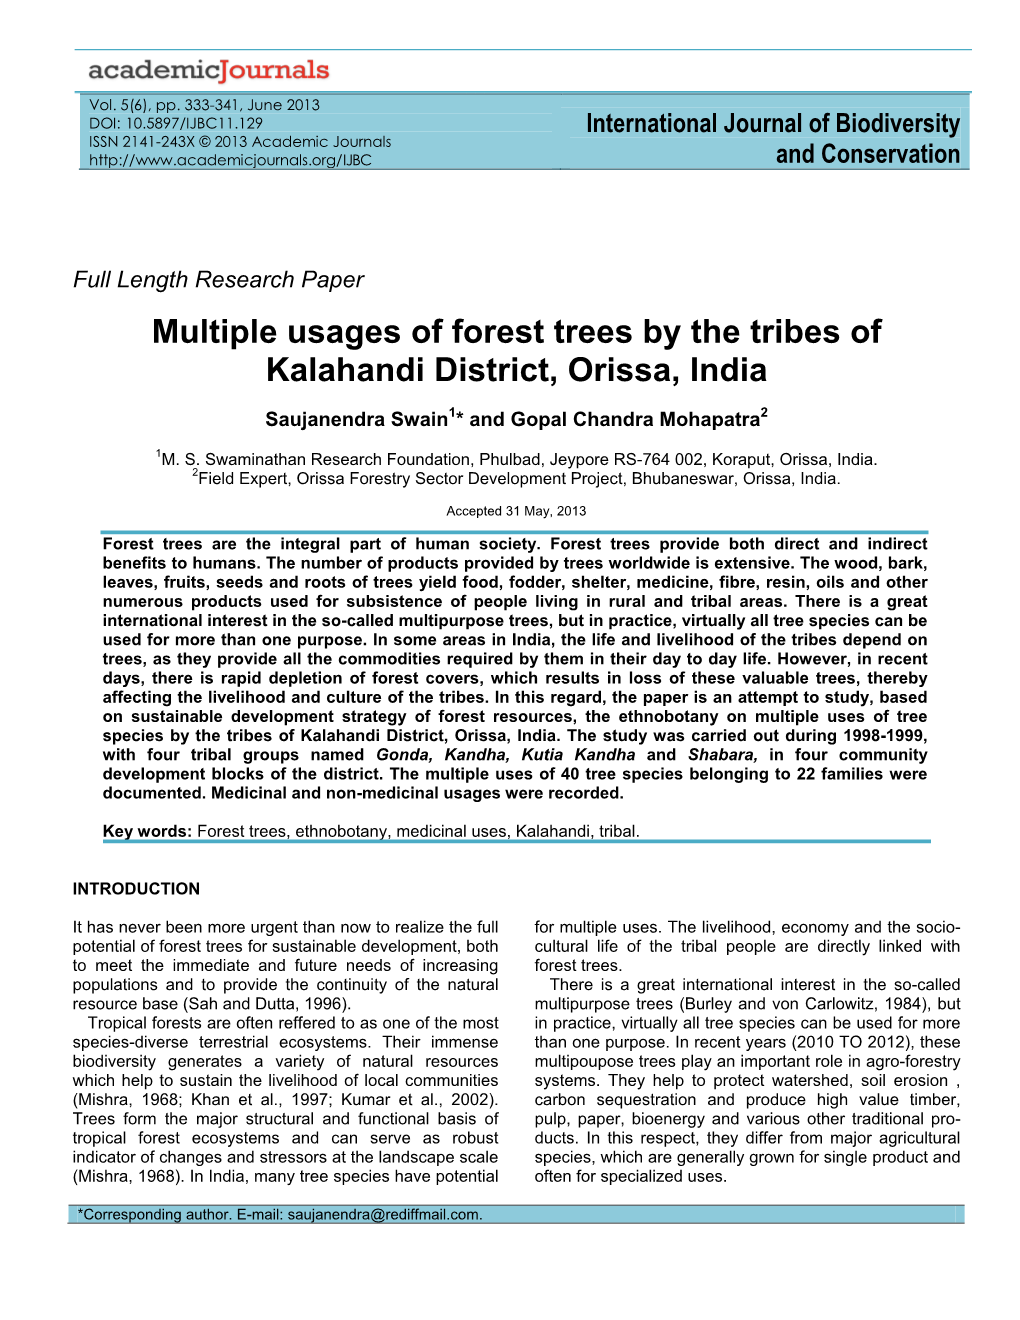 Multiple Usages of Forest Trees by the Tribes of Kalahandi District, Orissa, India